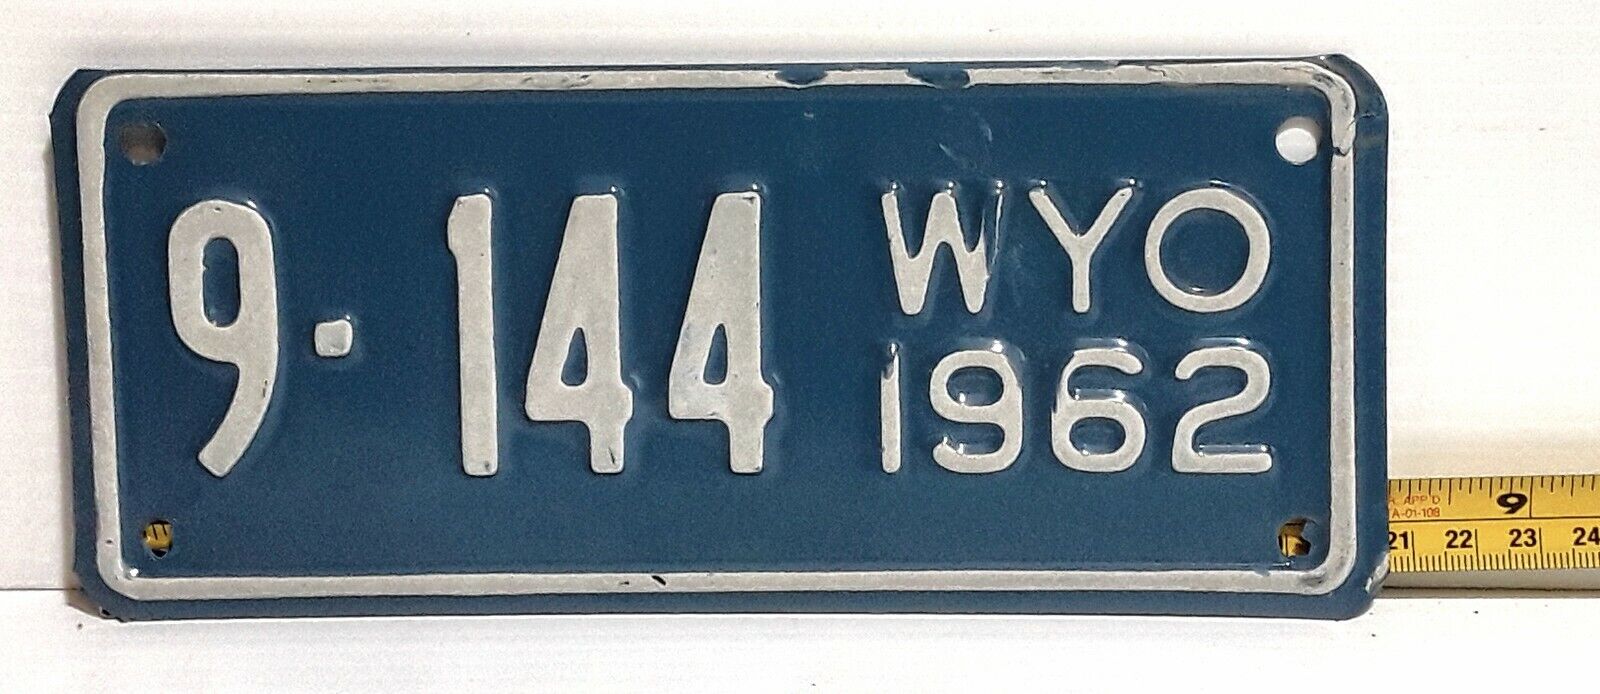 MOTORCYCLE - WYOMING - 1962 license plate - very nice all original glass / blue